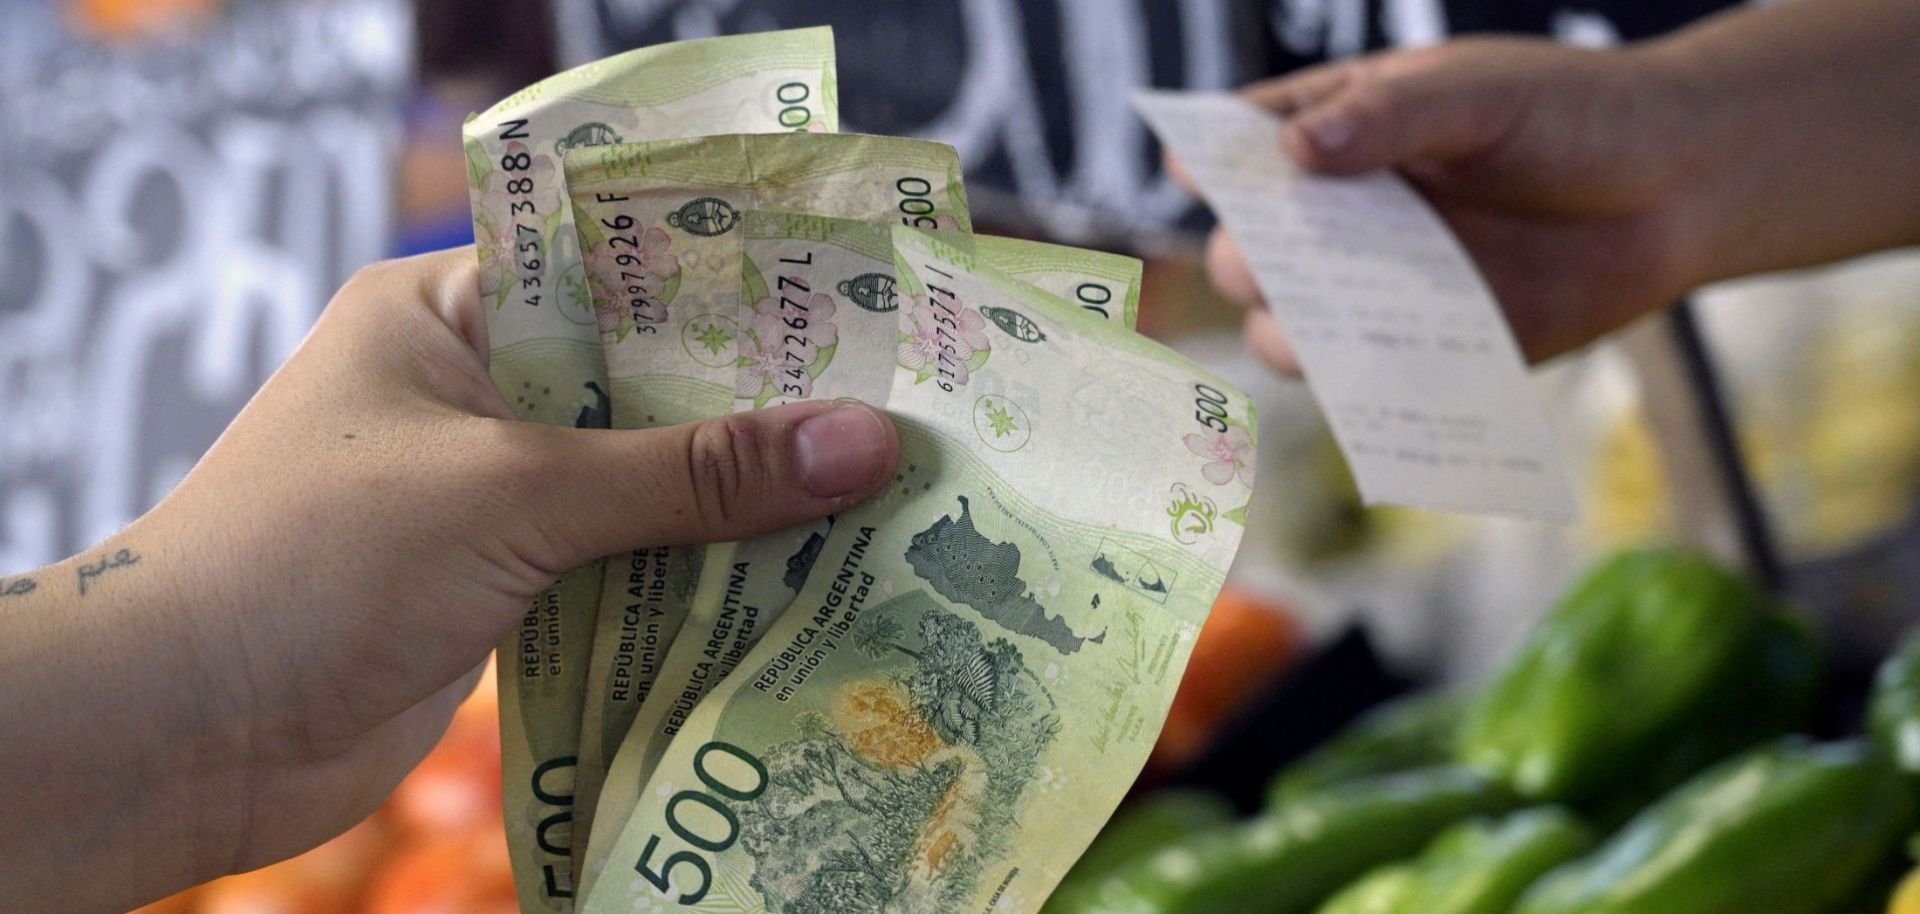 A woman pays for fruits and vegetables in Argentine pesos at a market in Buenos Aires on Feb. 10, 2023.